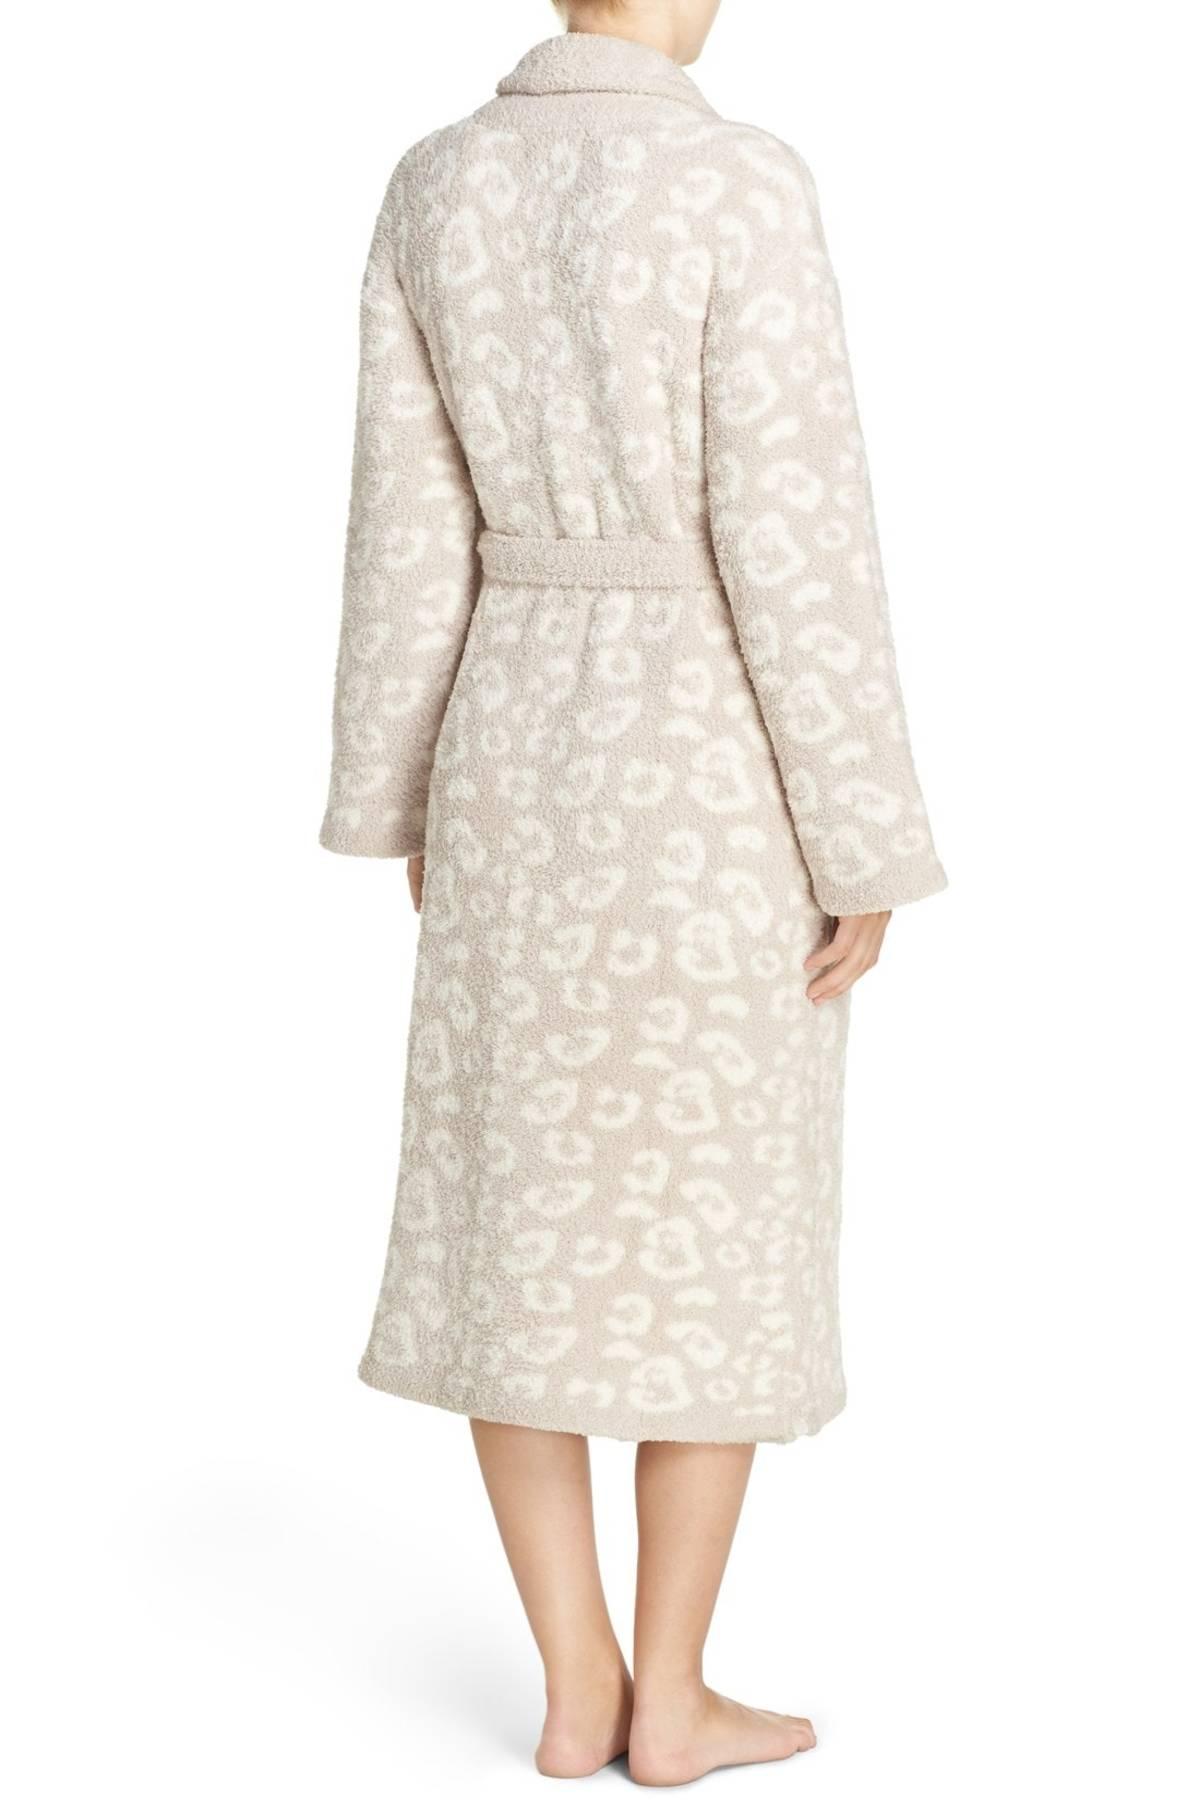 Barefoot Dreams Robe Leopard Clearance, SAVE 56%.